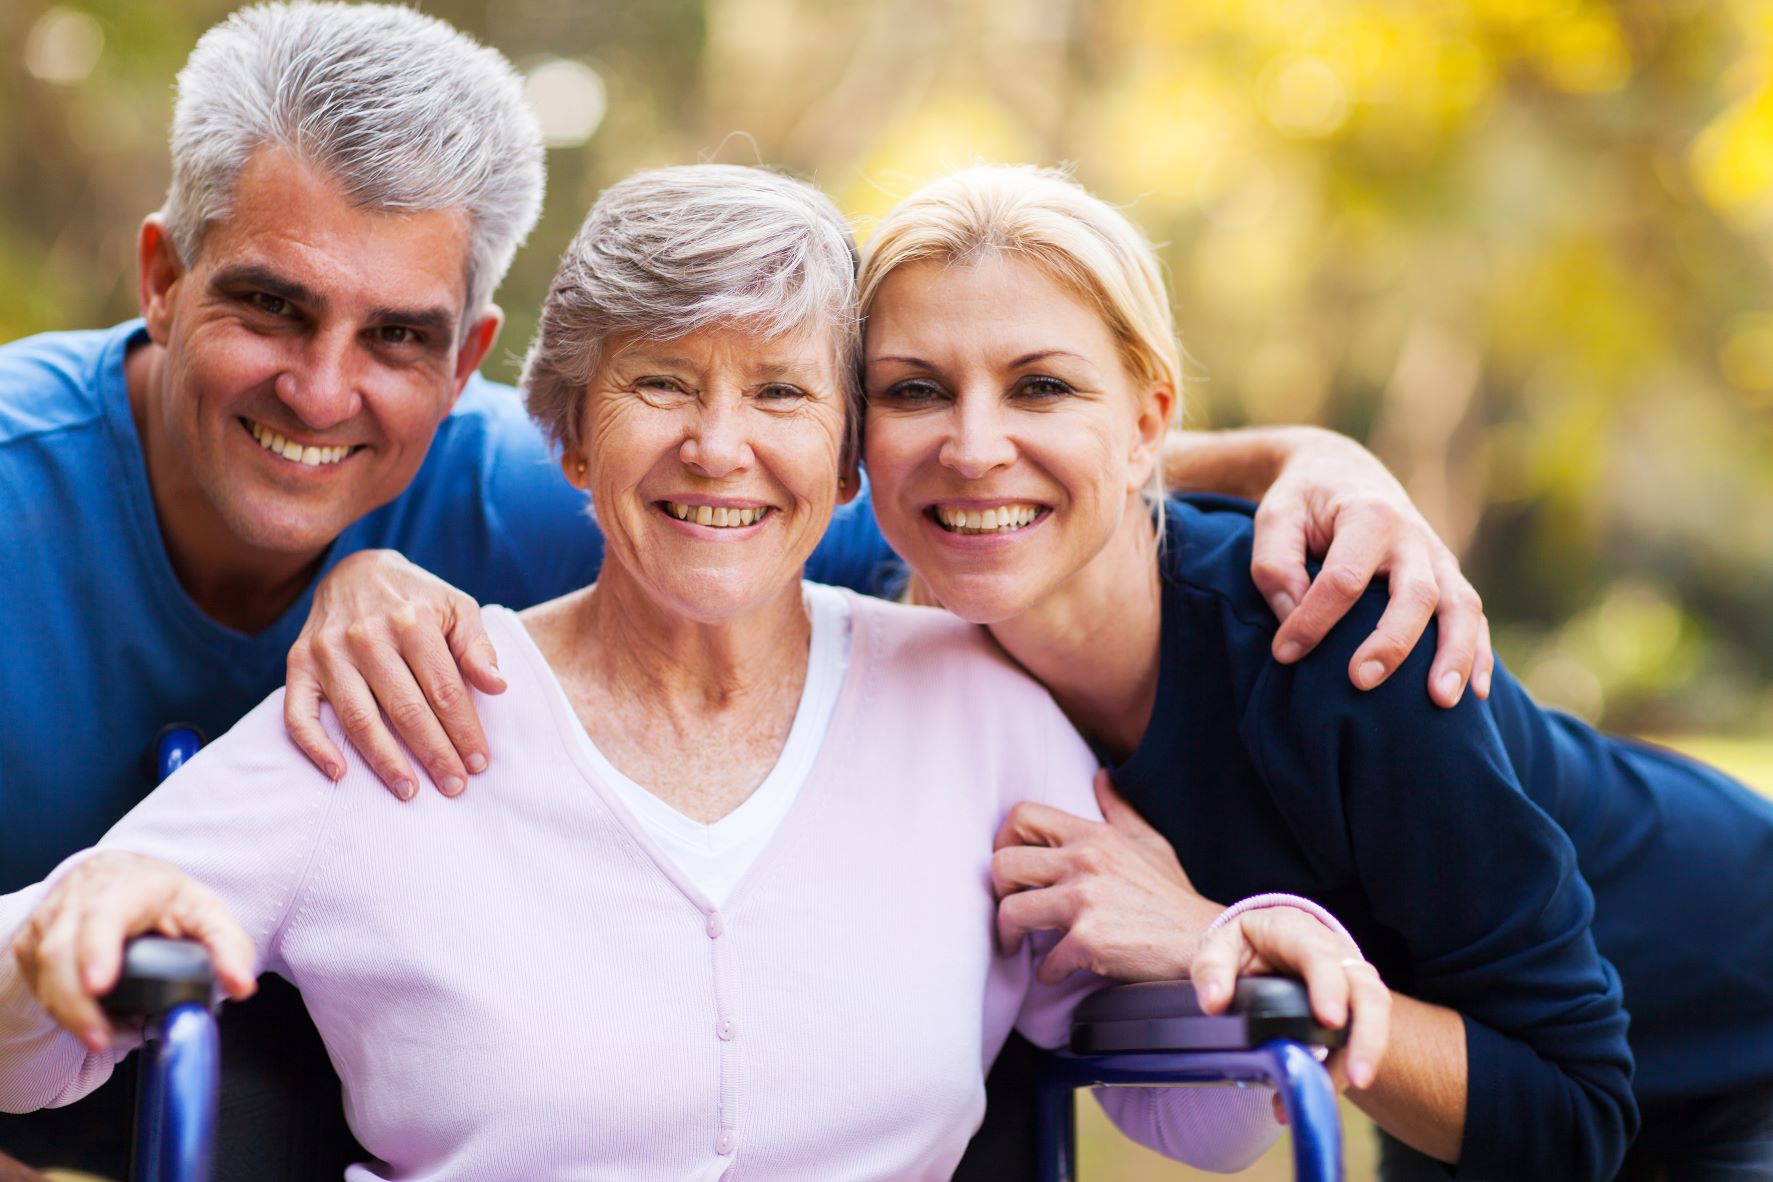 Elder Law all you need to know about Guardianships in Bucks County, PA